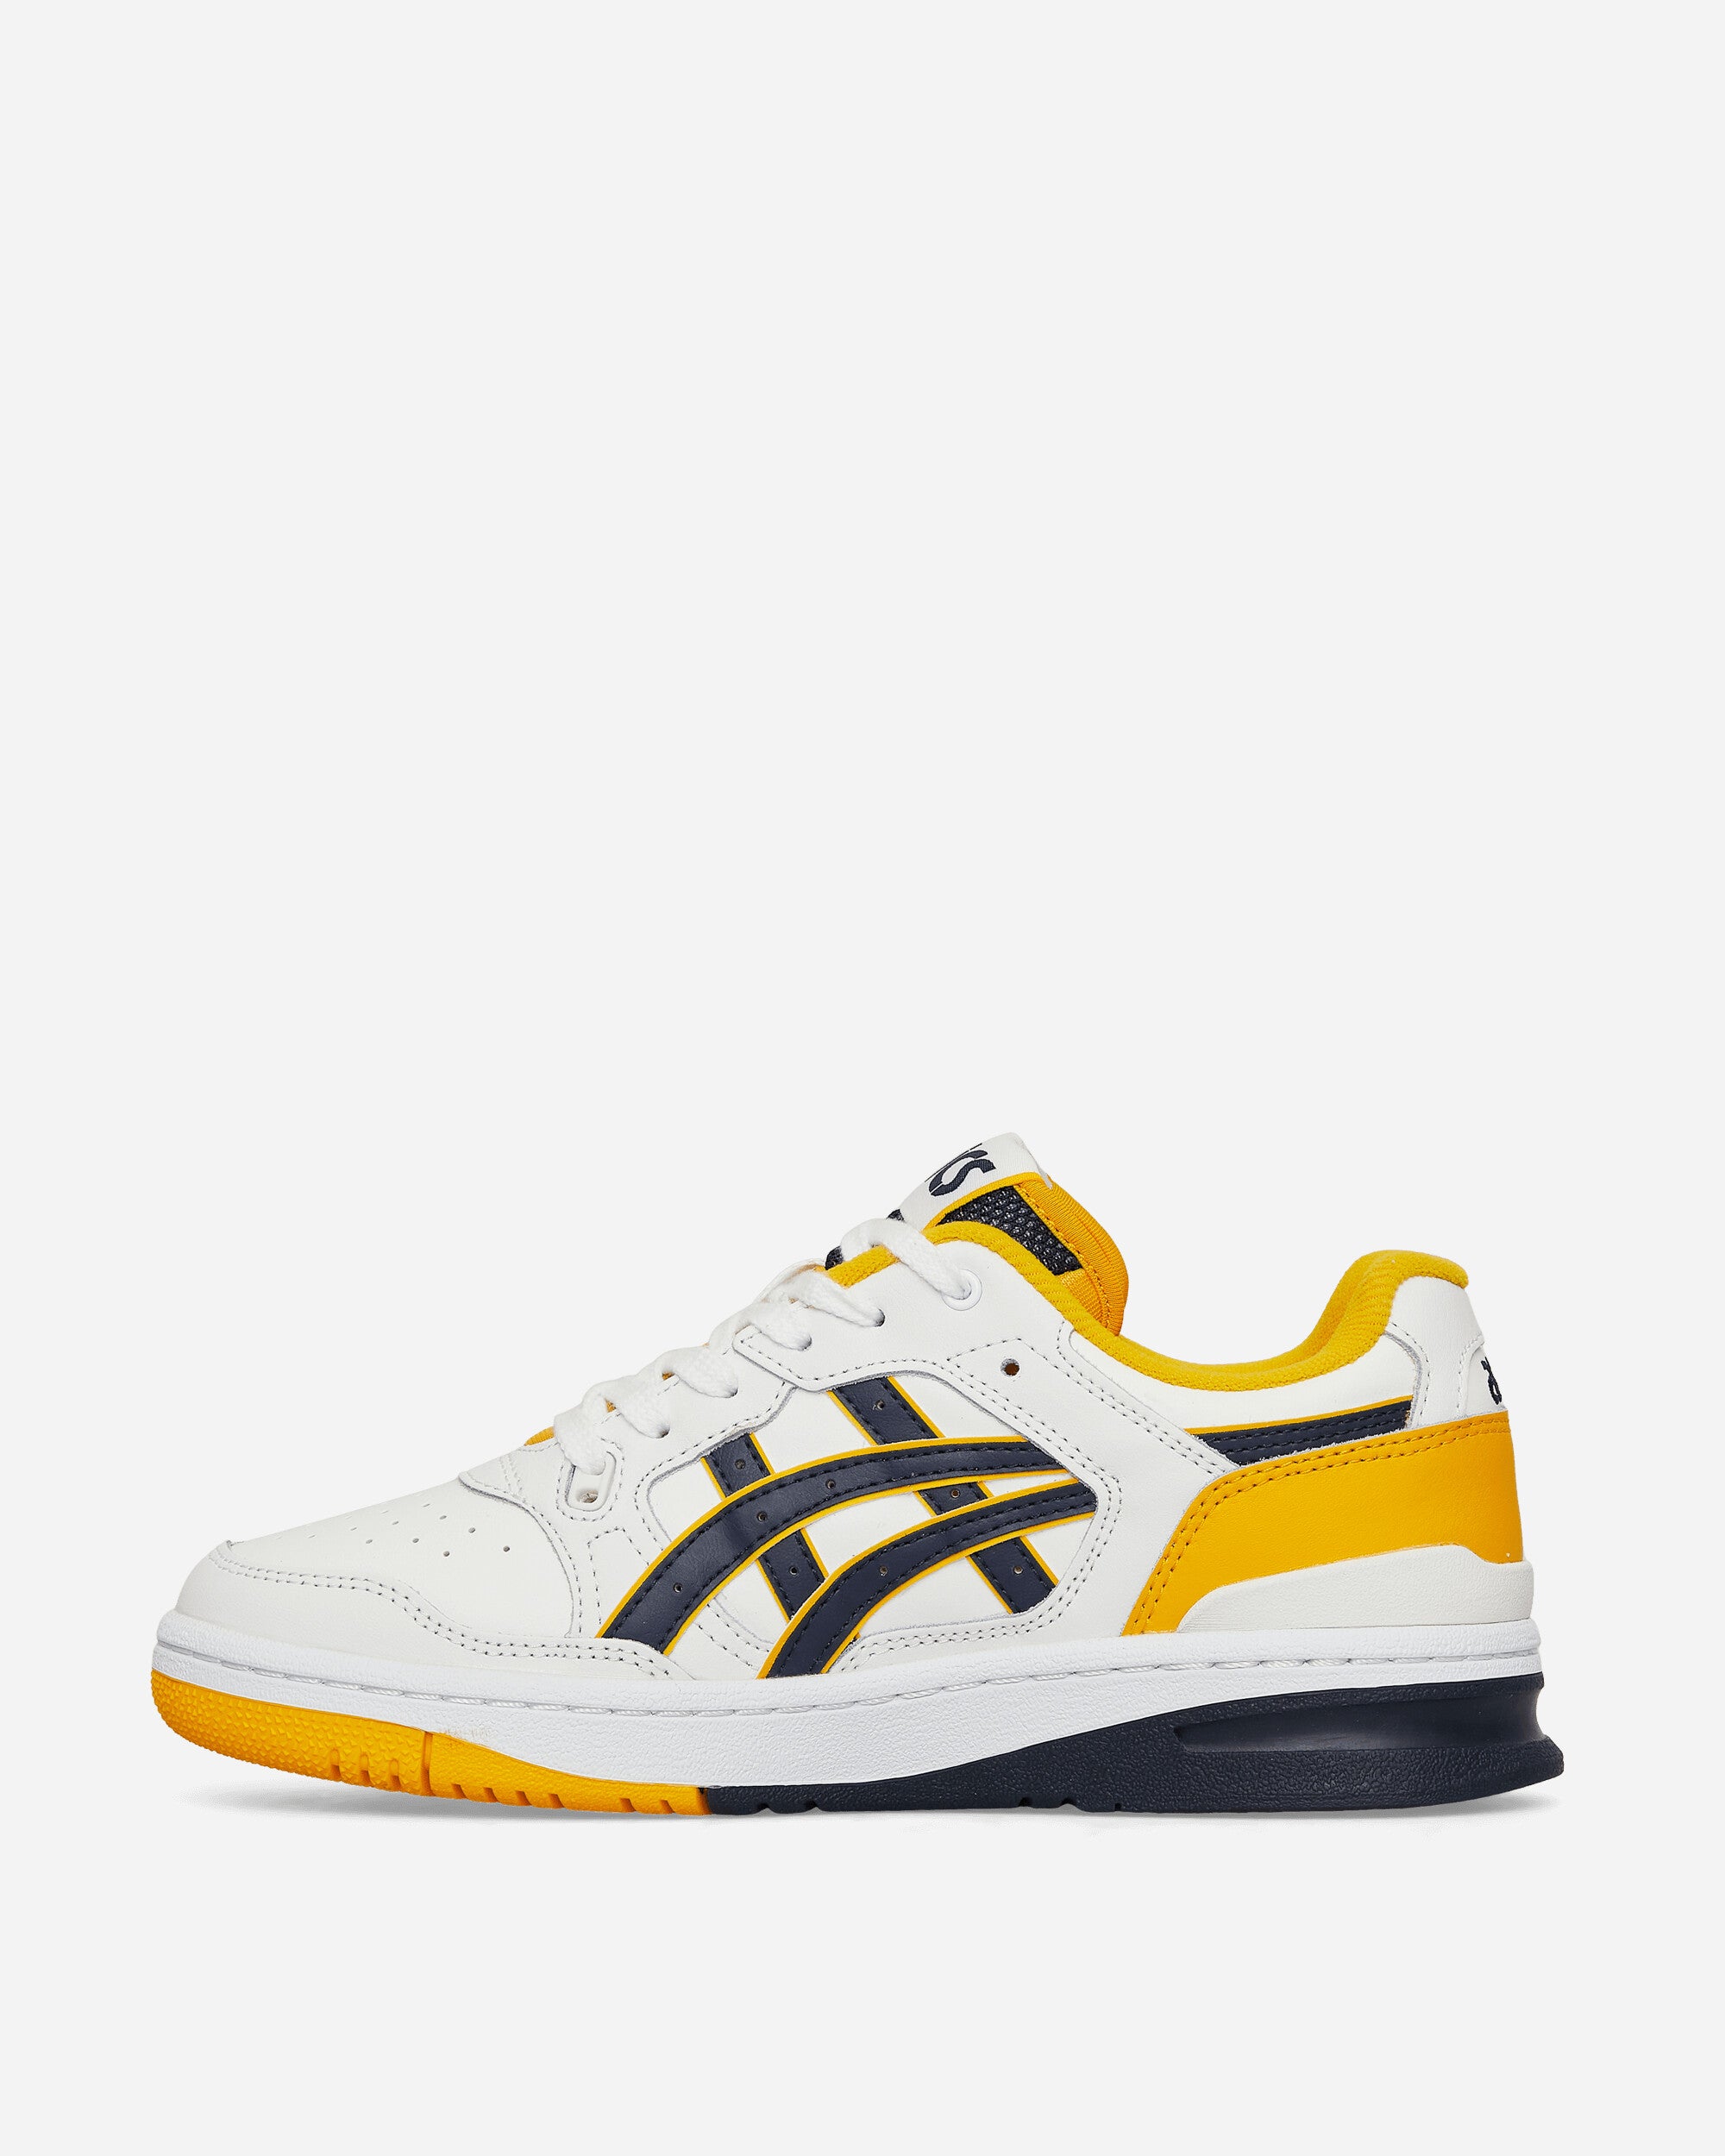 Asics Ex89 White/Midnight Sneakers Low 1201A476-112